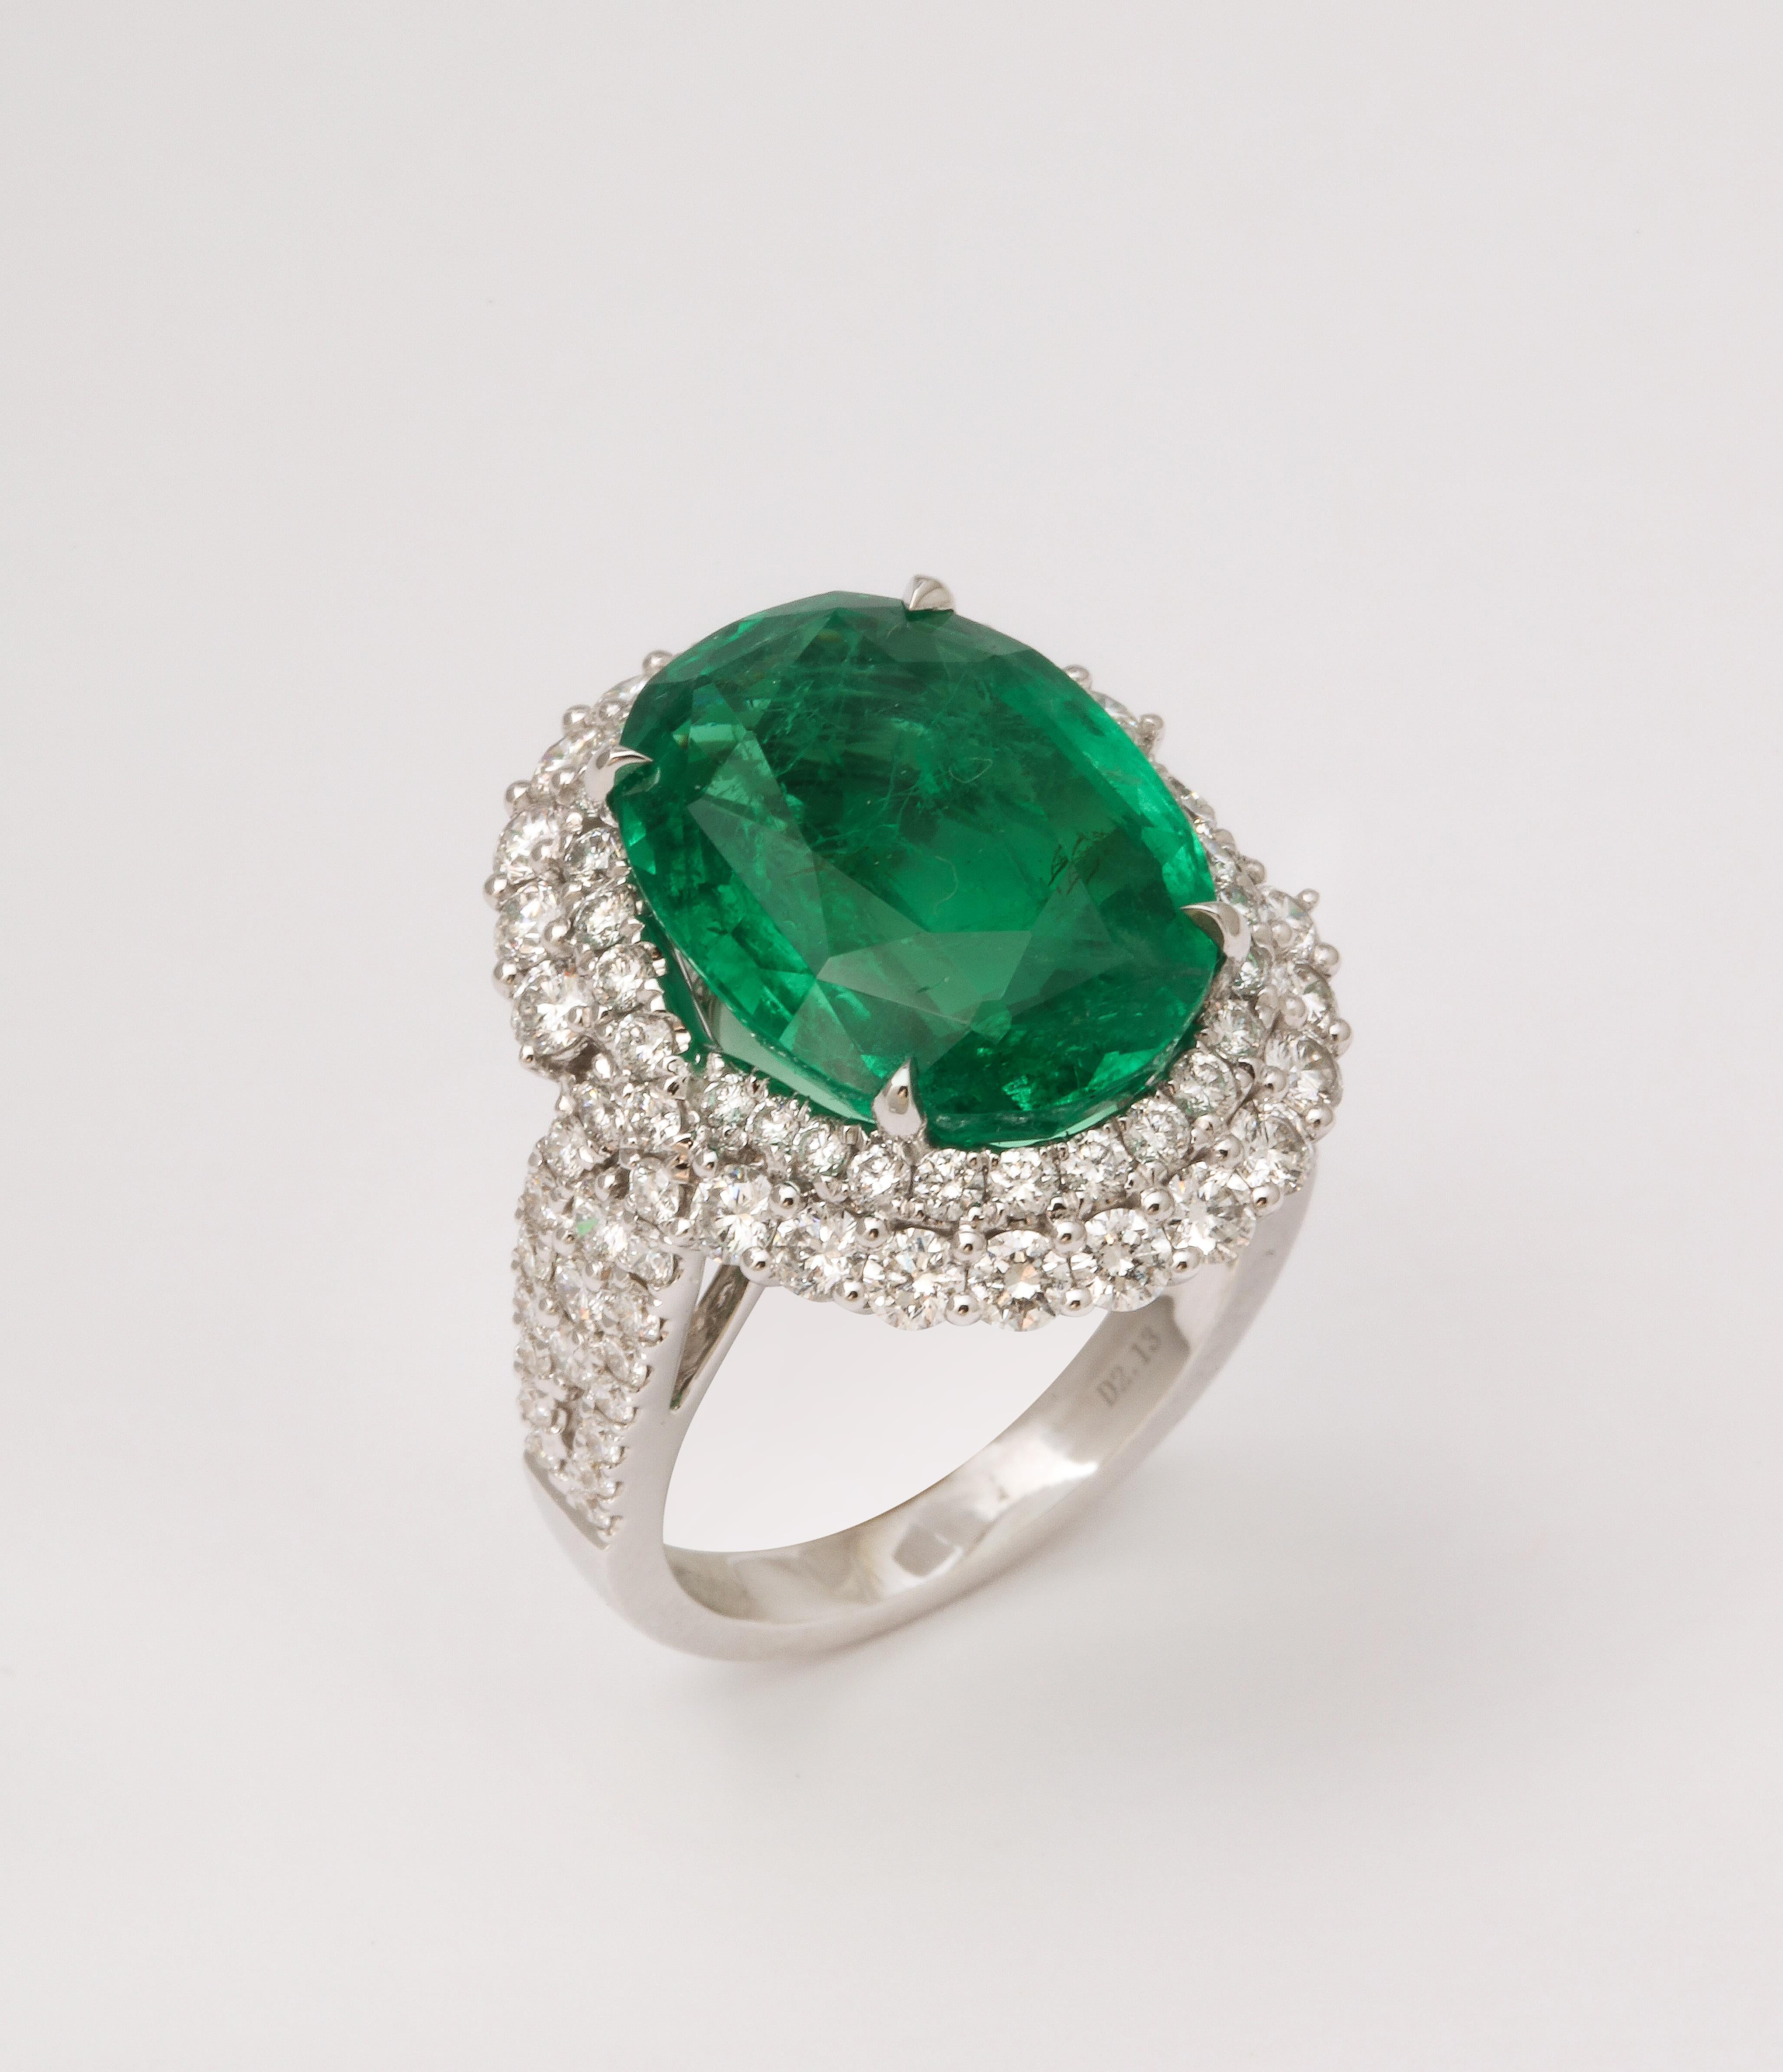 9 carat Vivid Green Emerald and Diamond Ring  For Sale 3